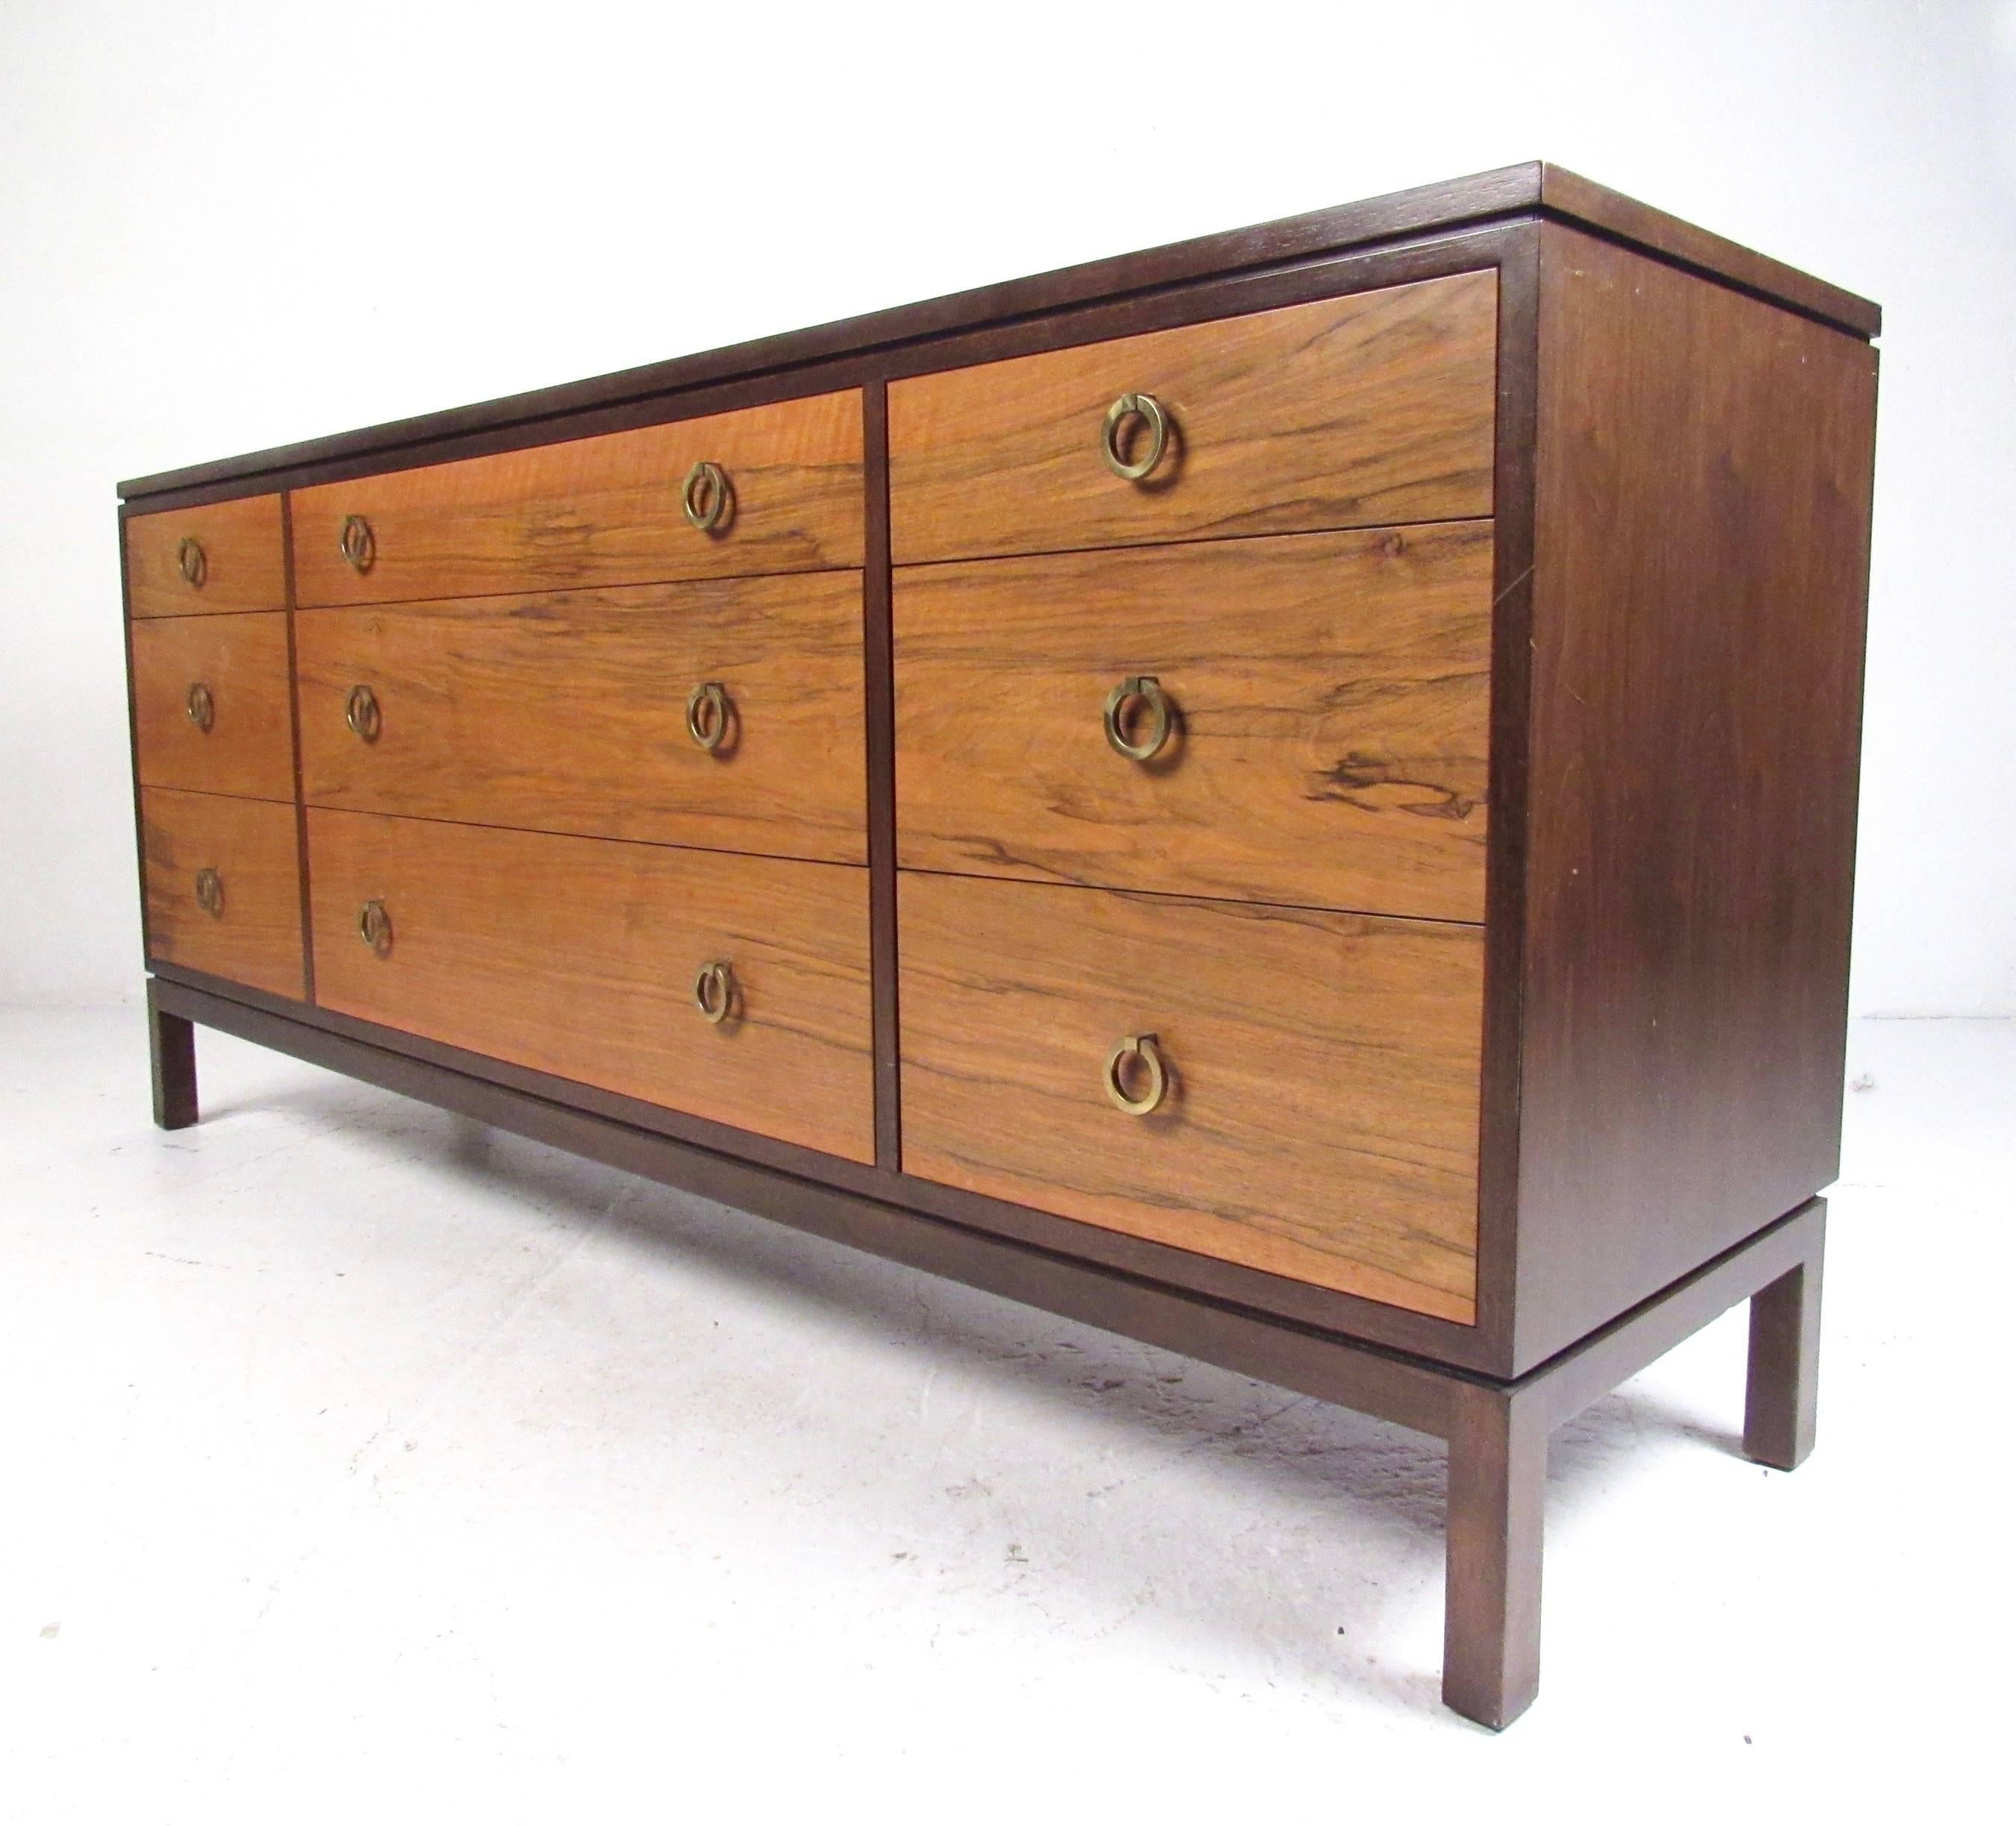 This stunning nine drawer bedroom dresser features unique vintage wood finish with iconic brass ring drawer pulls. This spacious low dresser was designed by Roger Sprunger (model #6423) for Dunbar furniture and makes an impressive addition to any